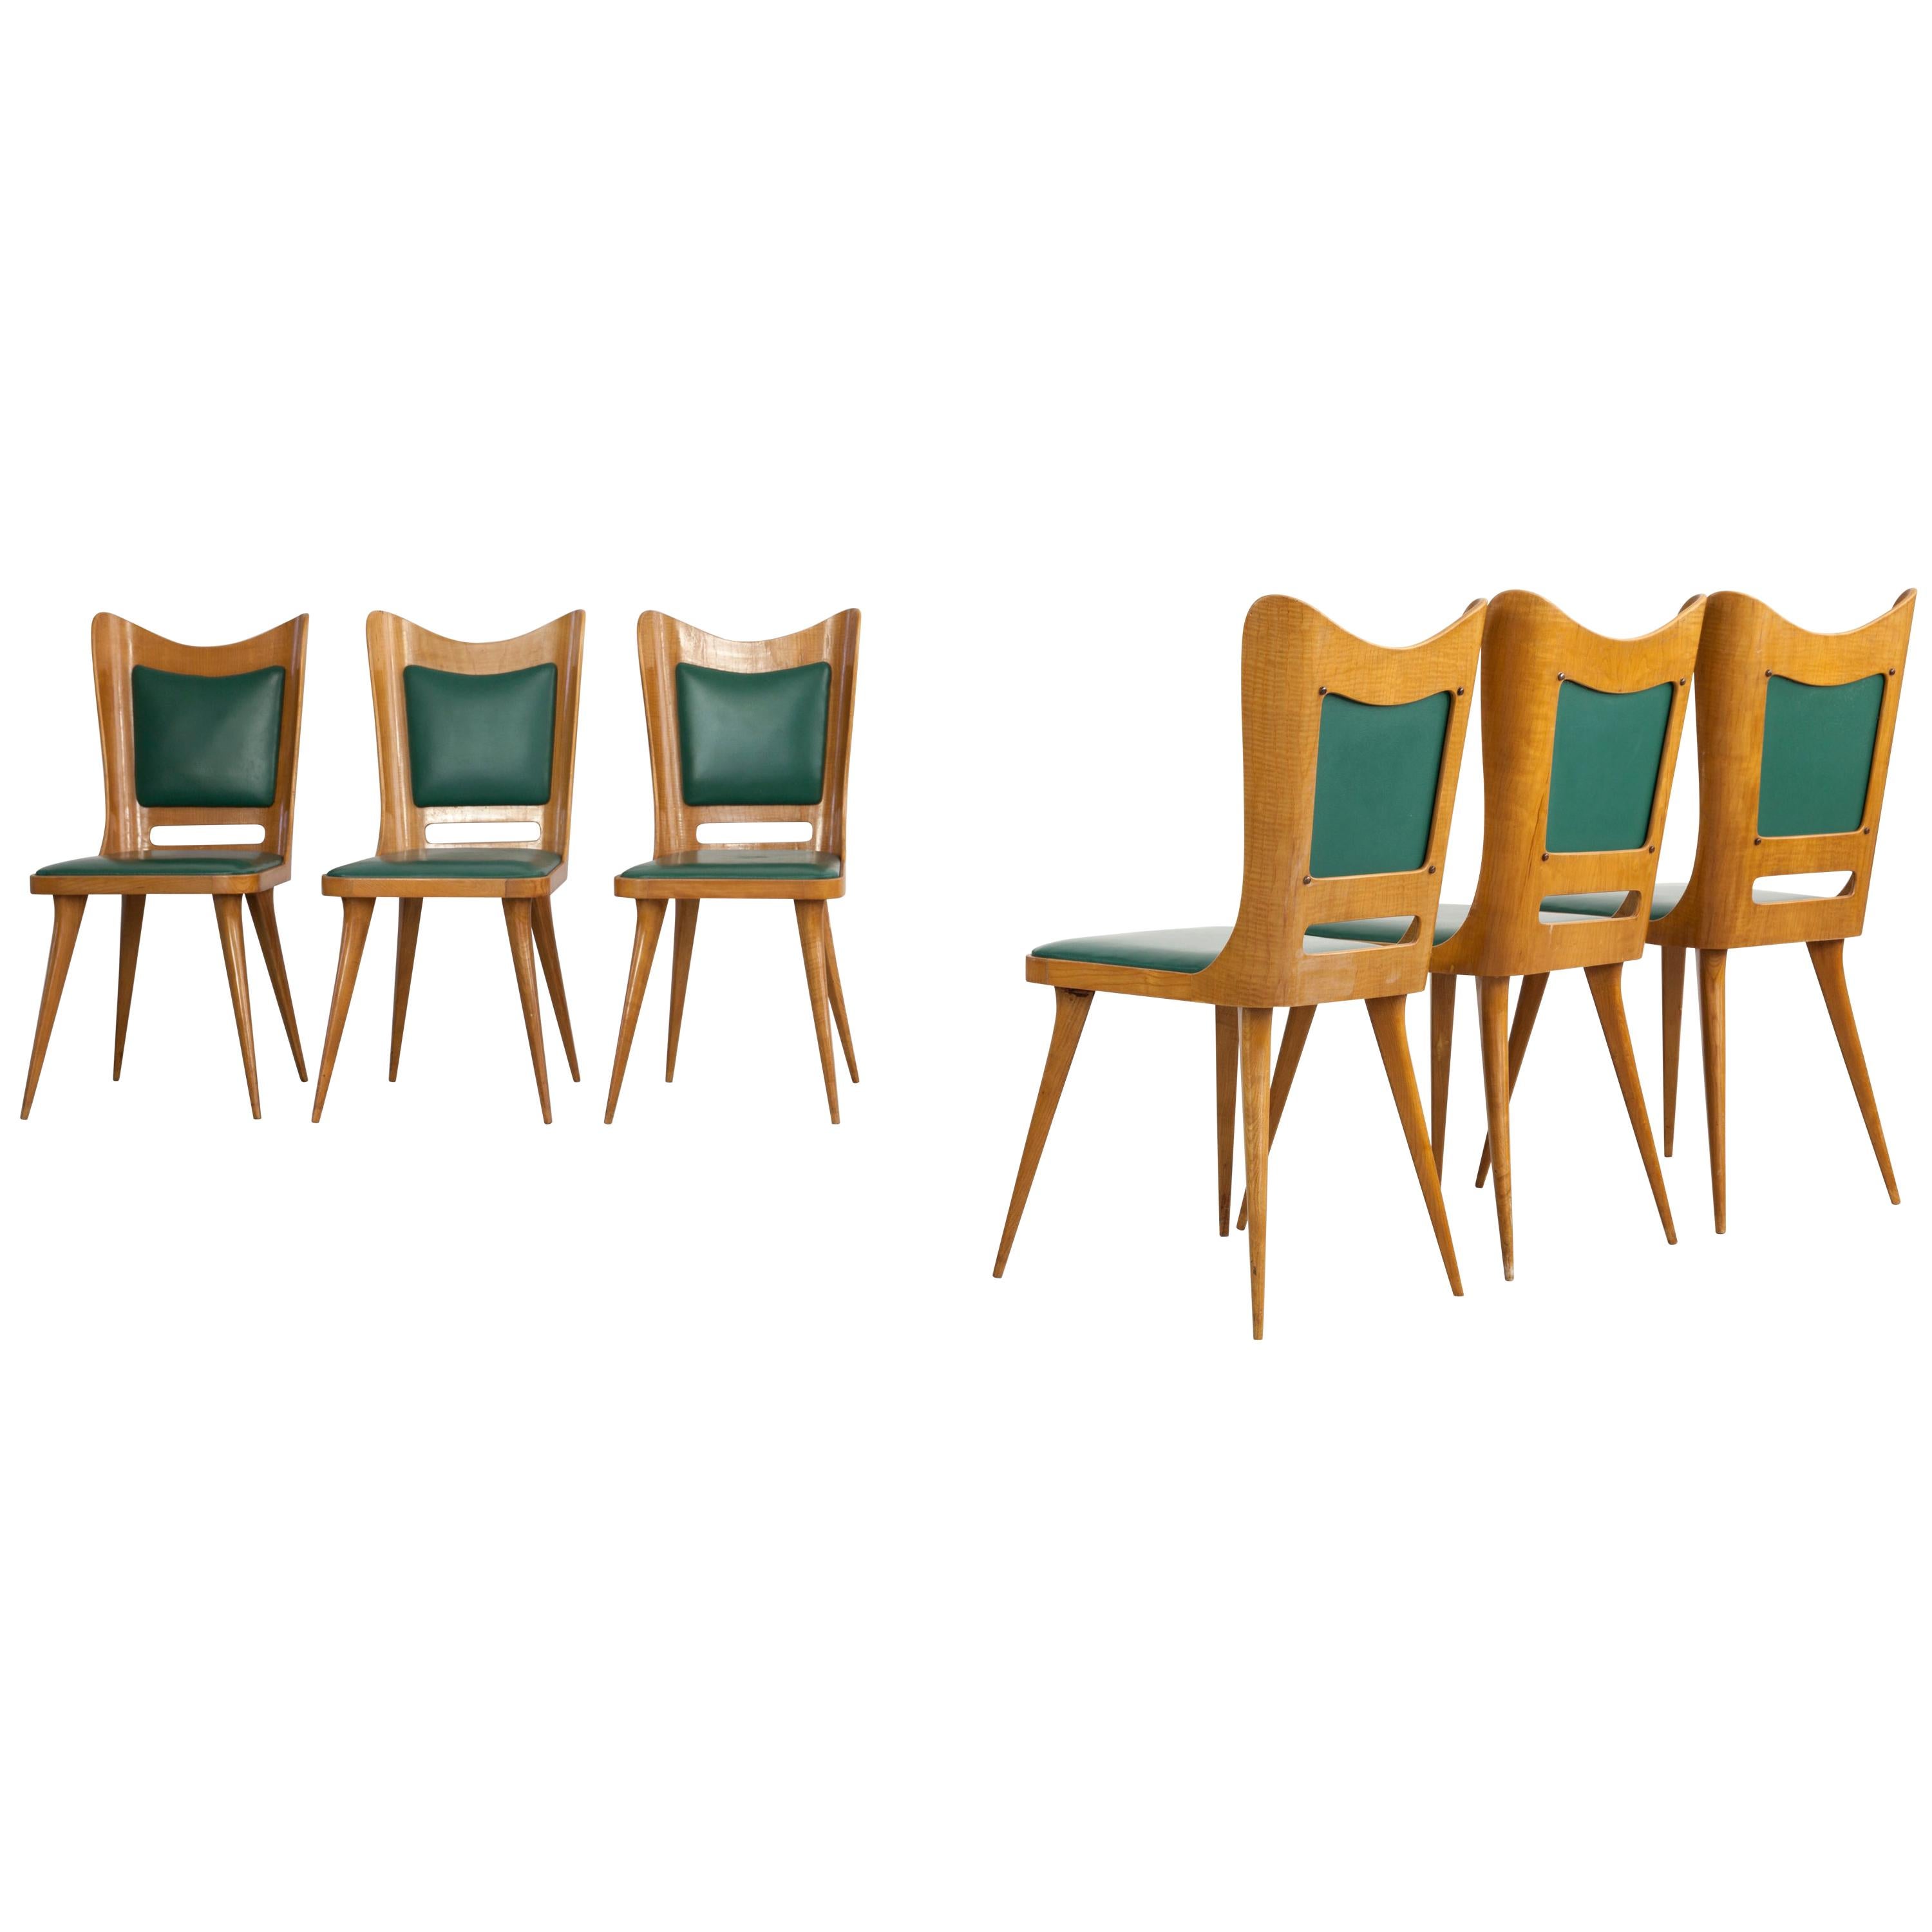 Set of Six Italian Wooden Dining Chairs with Green Upholstery, 1950 For Sale